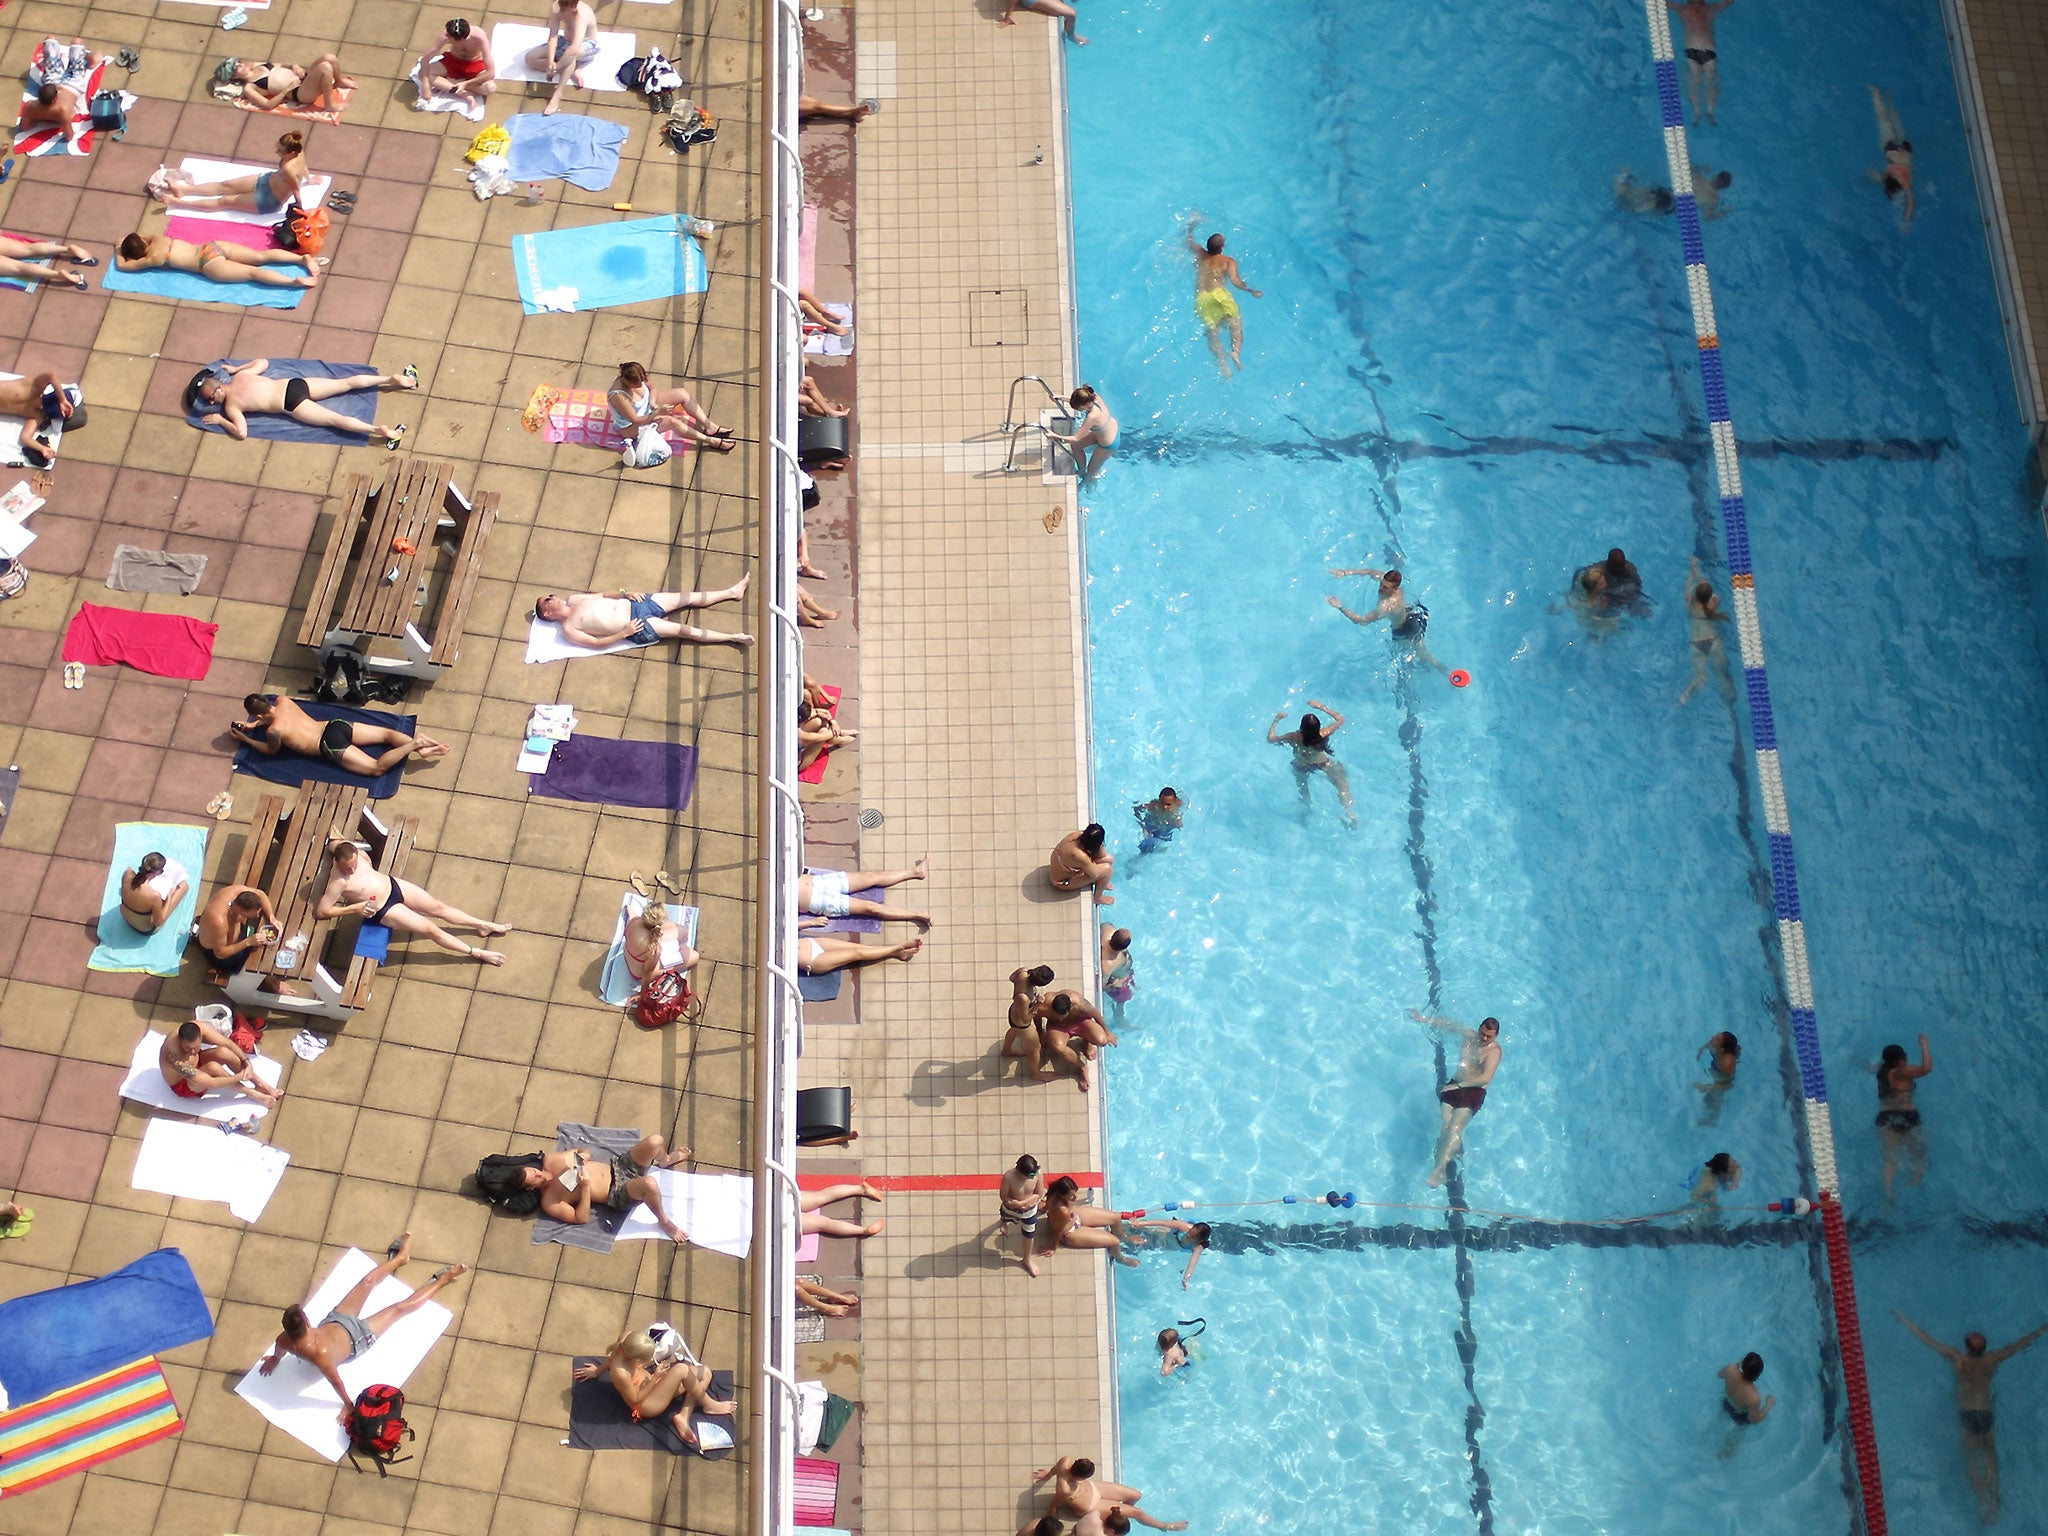 Swimmers enjoy the sunshine at an outdoor pool in central London on July 17, 2013 in England. The United Kingdom is experiencing heatwave conditions for a second week.